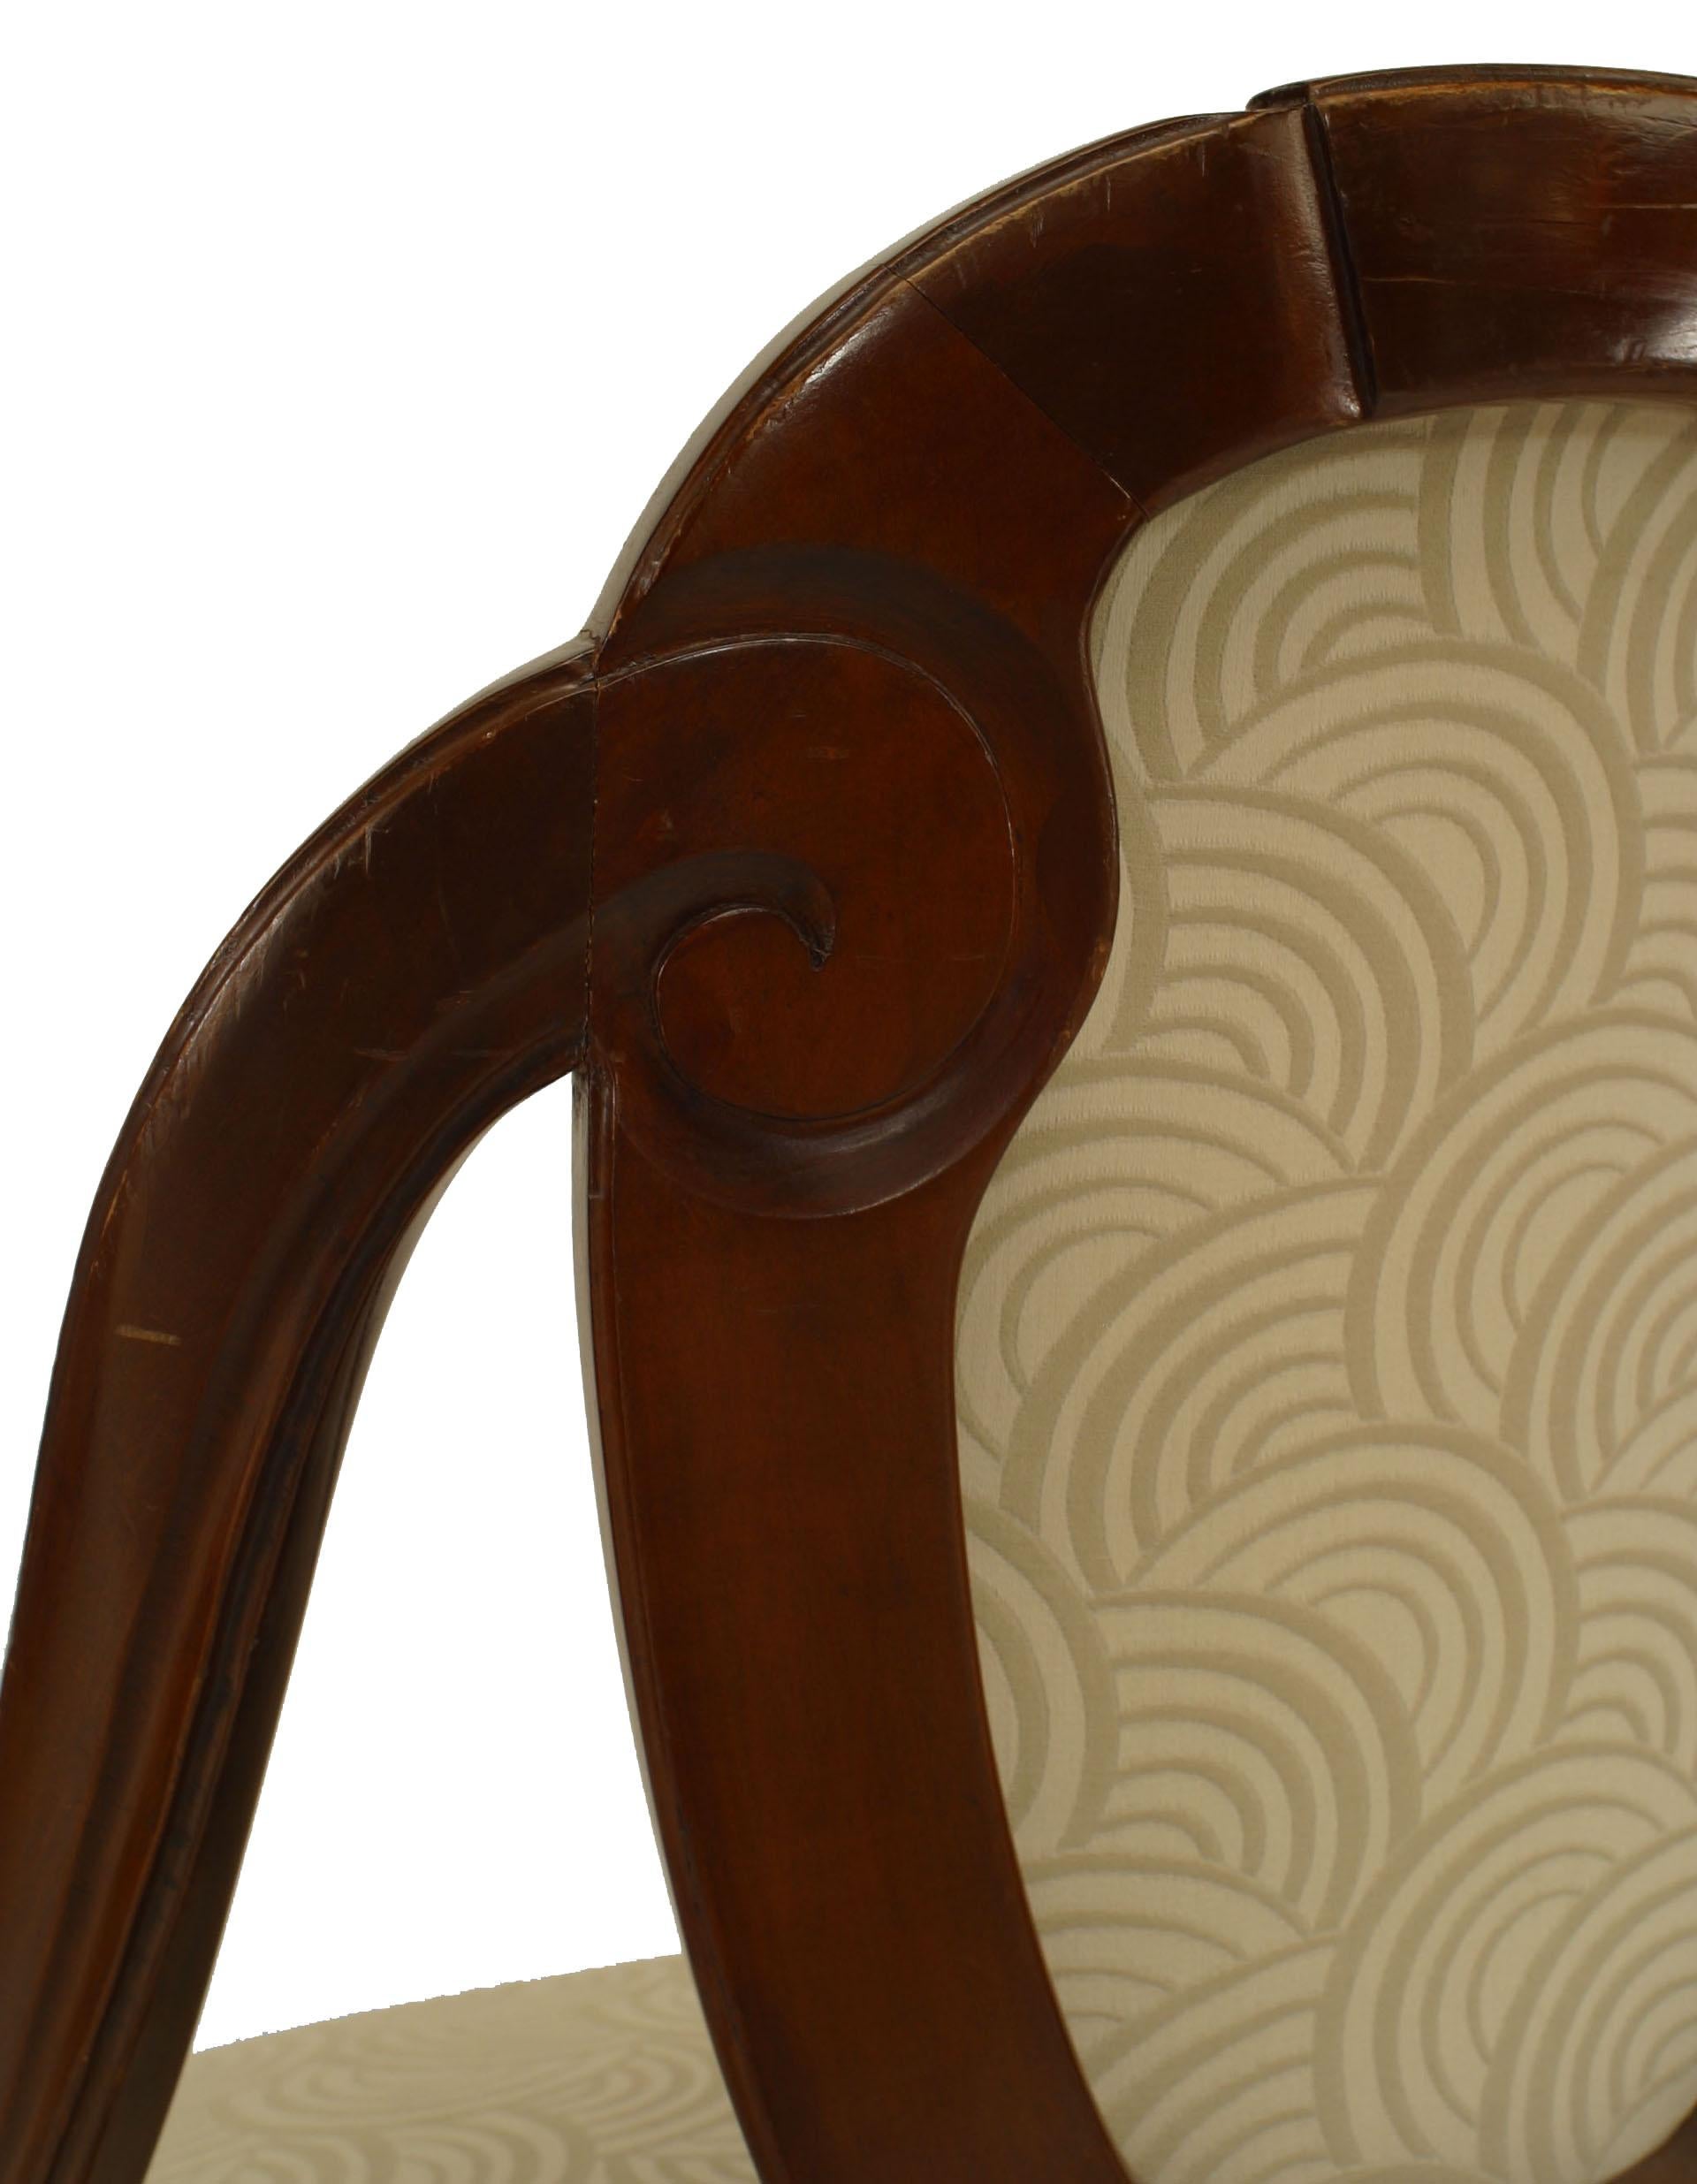 20th Century French Art Deco Scroll Back Side Chairs